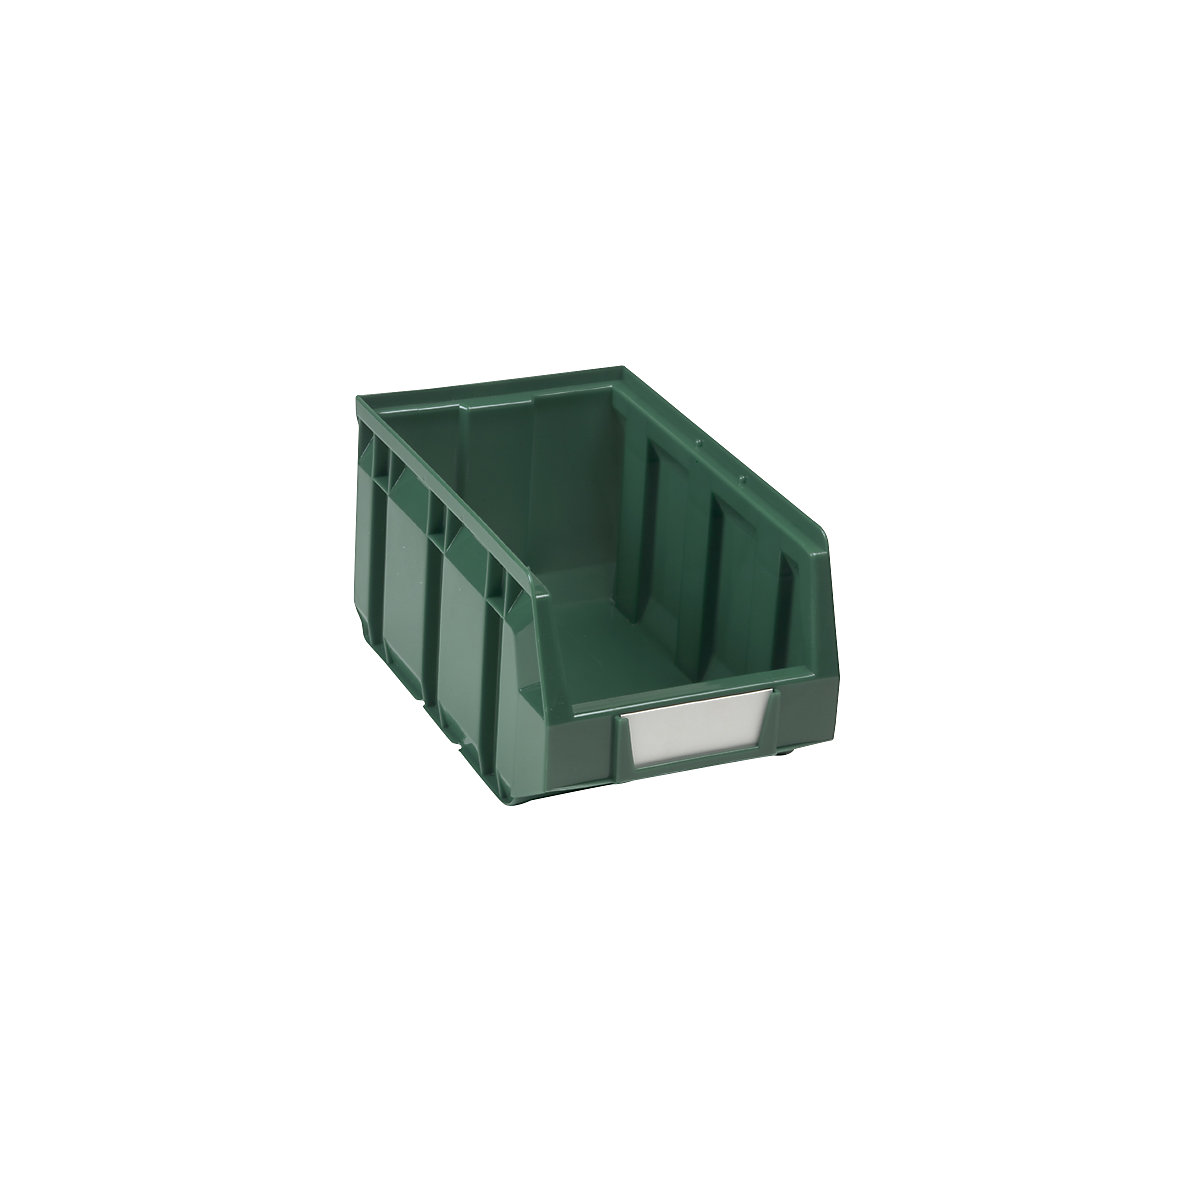 Open fronted storage bin made of polyethylene, LxWxH 237 x 144 x 123 mm, green, pack of 38-10